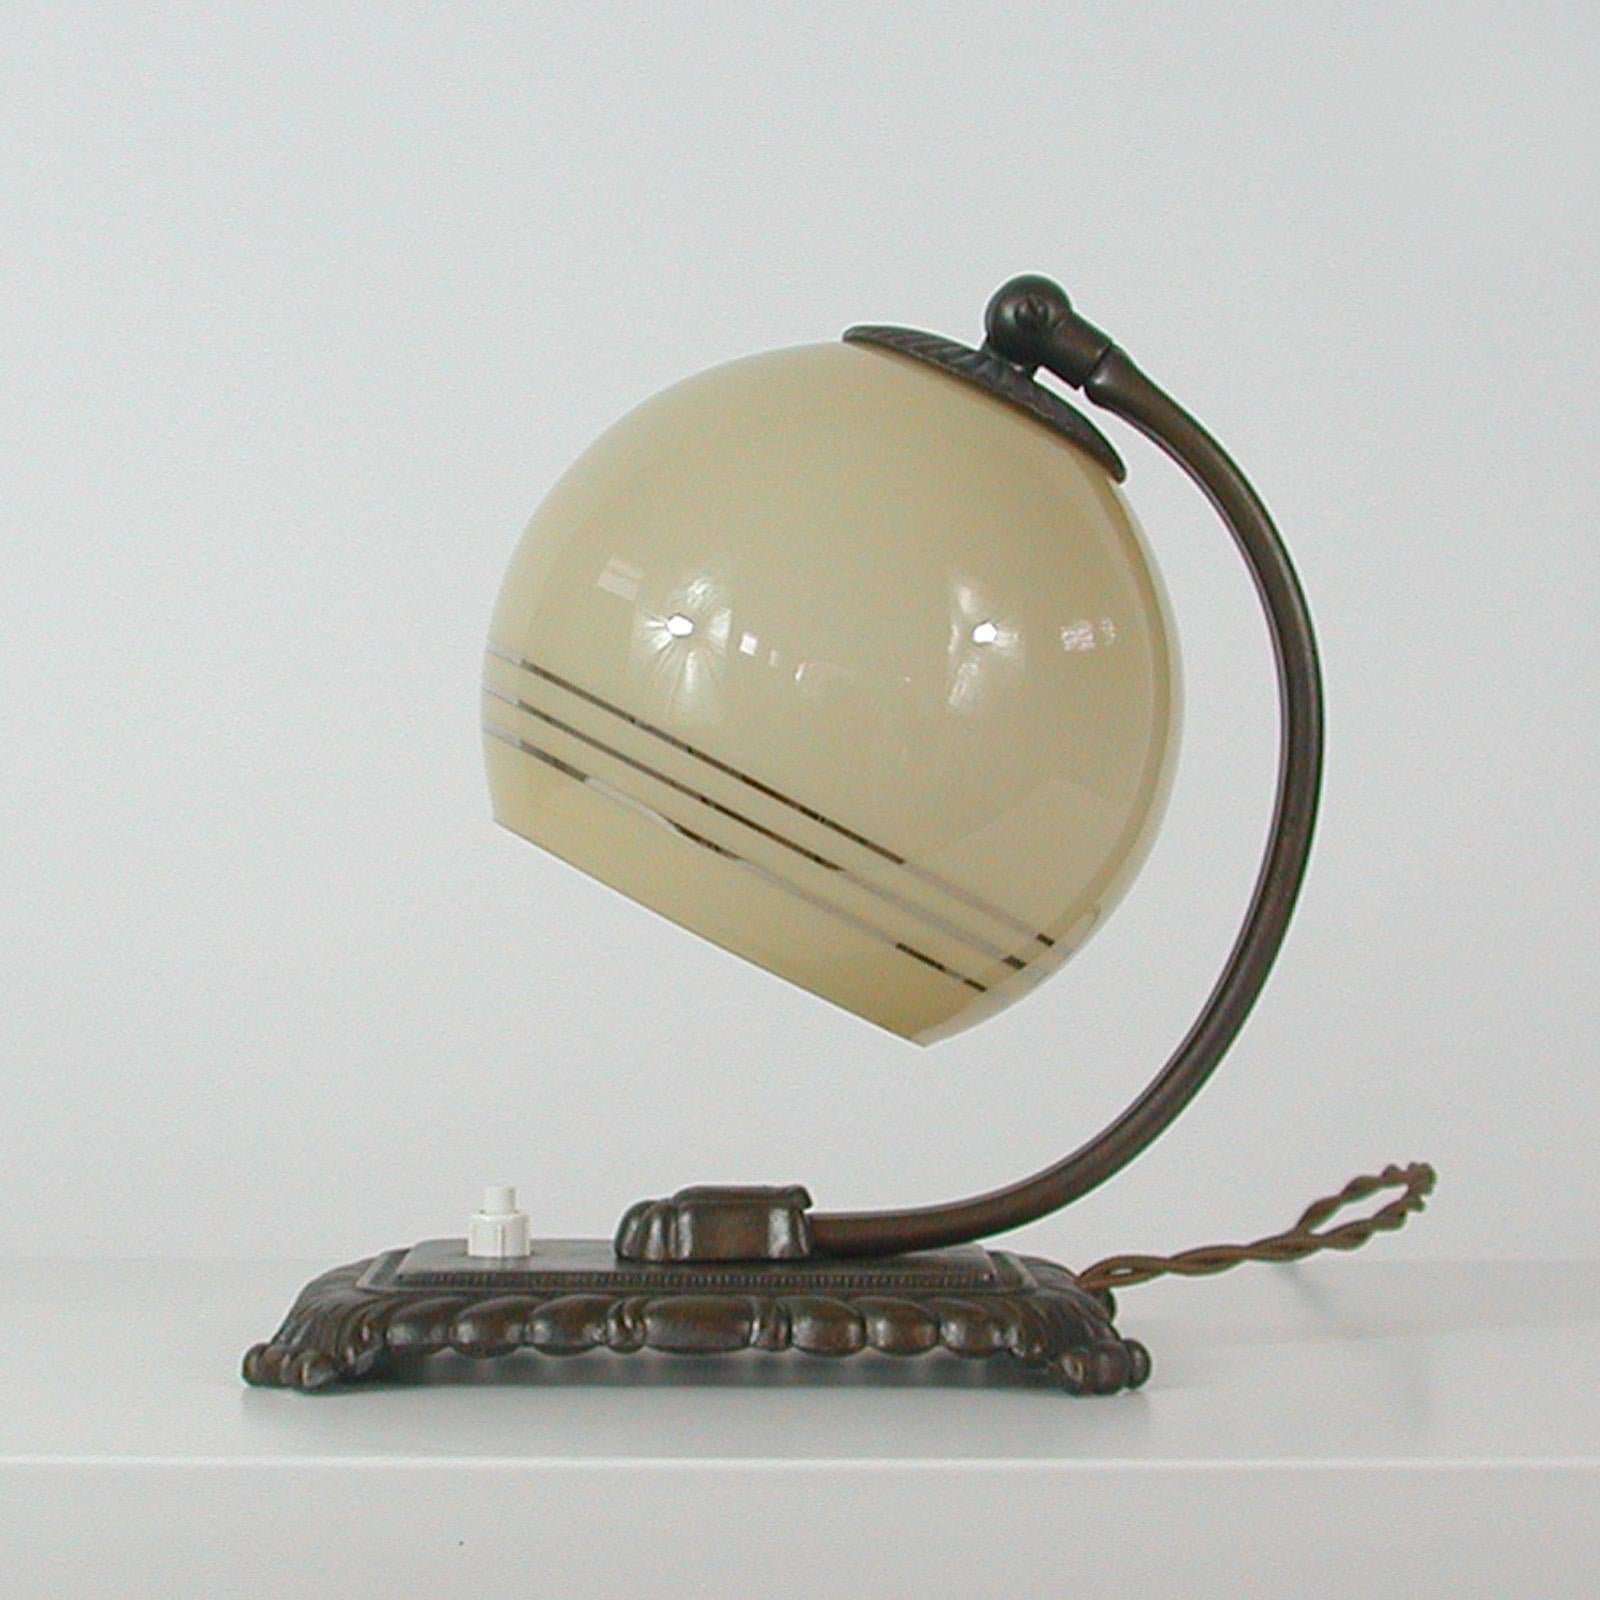 This awesome vintage table or bedside lamp was made in Germany in the 1920s-1930s during the Art Deco period. It is made of bronzed brass and has got an adjustable lamp shade in cream with silver rings.

The light can be used as a table lamp as